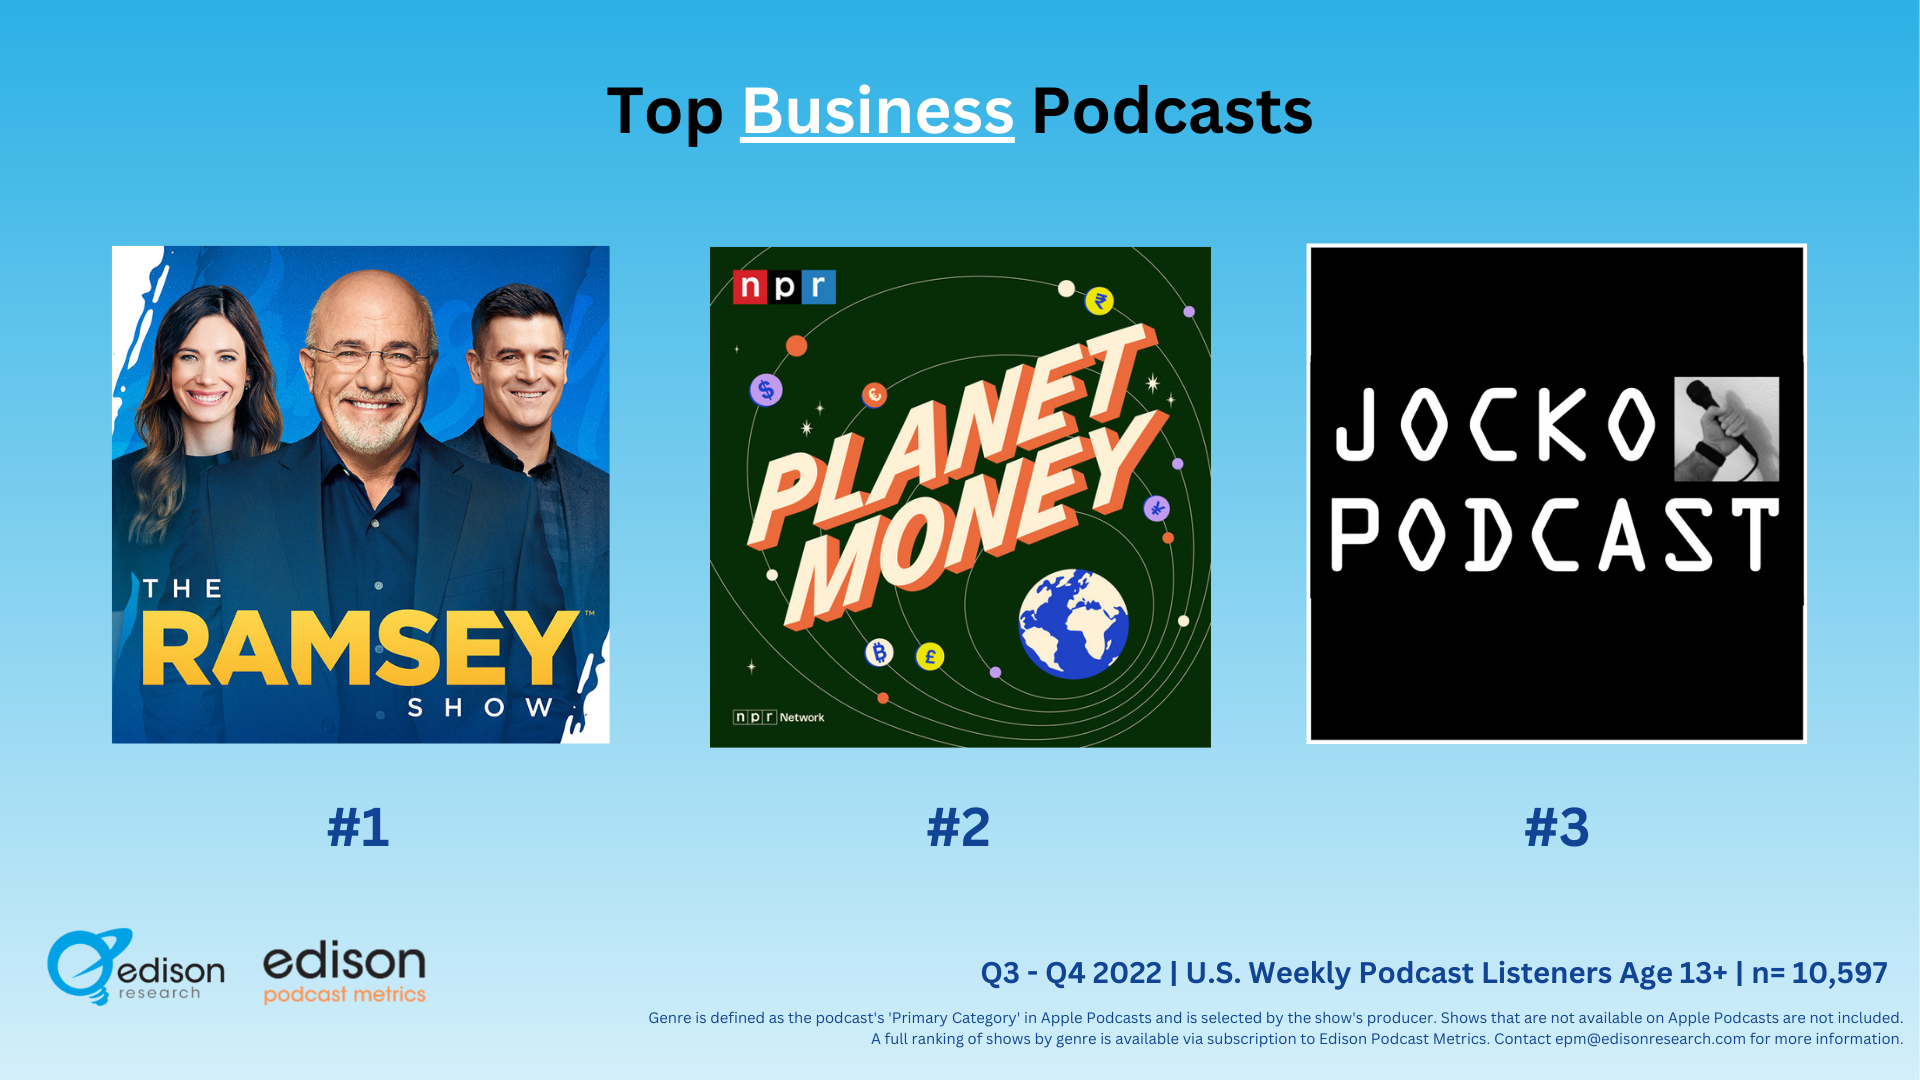 Top Podcasts in Business, Religion & Spirituality, and by reach - Edison Research